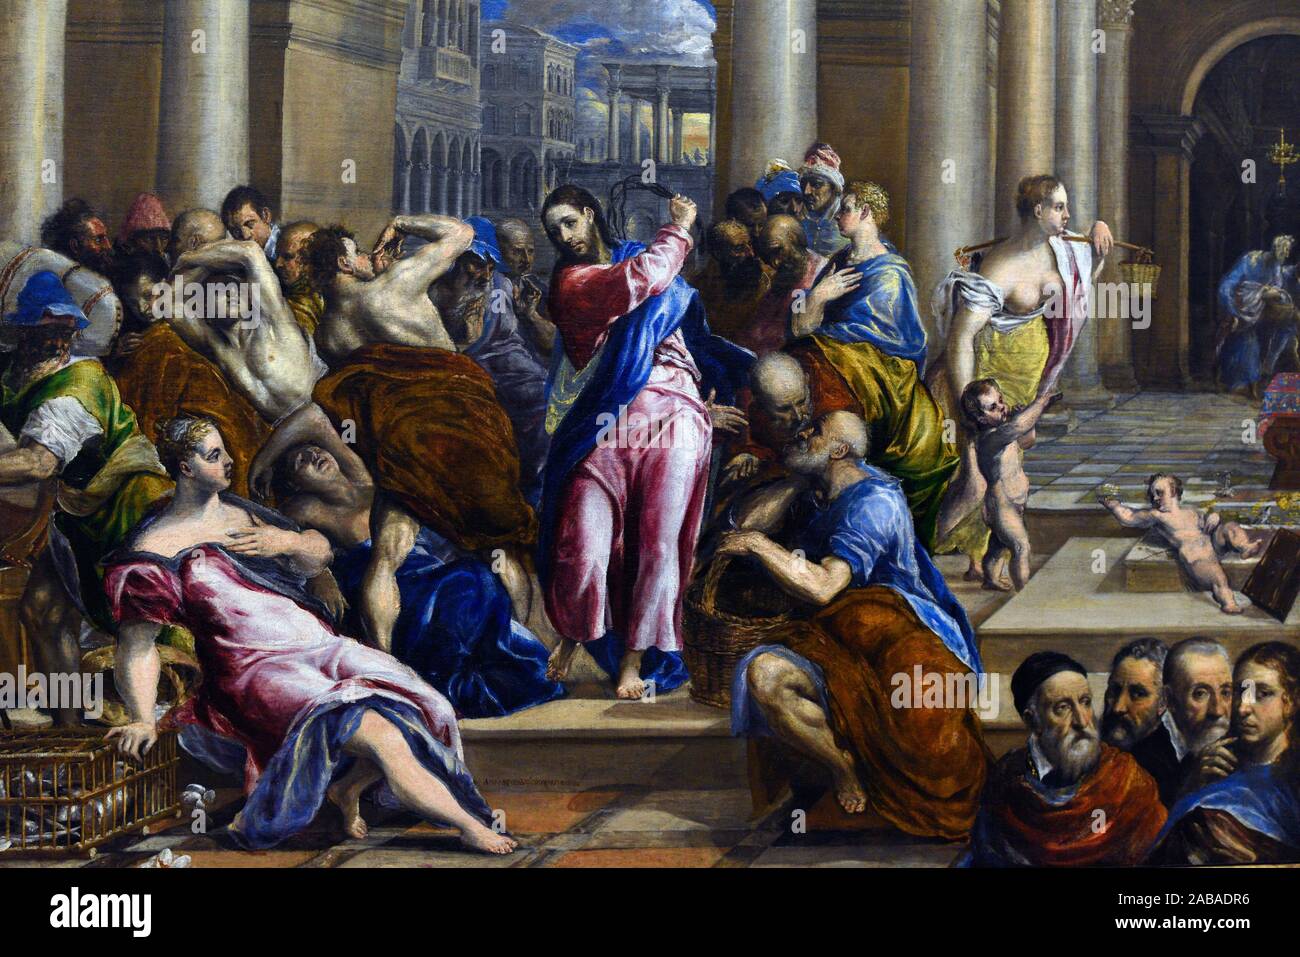 Christ Driving the Money Changers from the temple, oil on canvas, 1570, by the artist El Greco, Mineapolis Institute of Art. Stock Photo